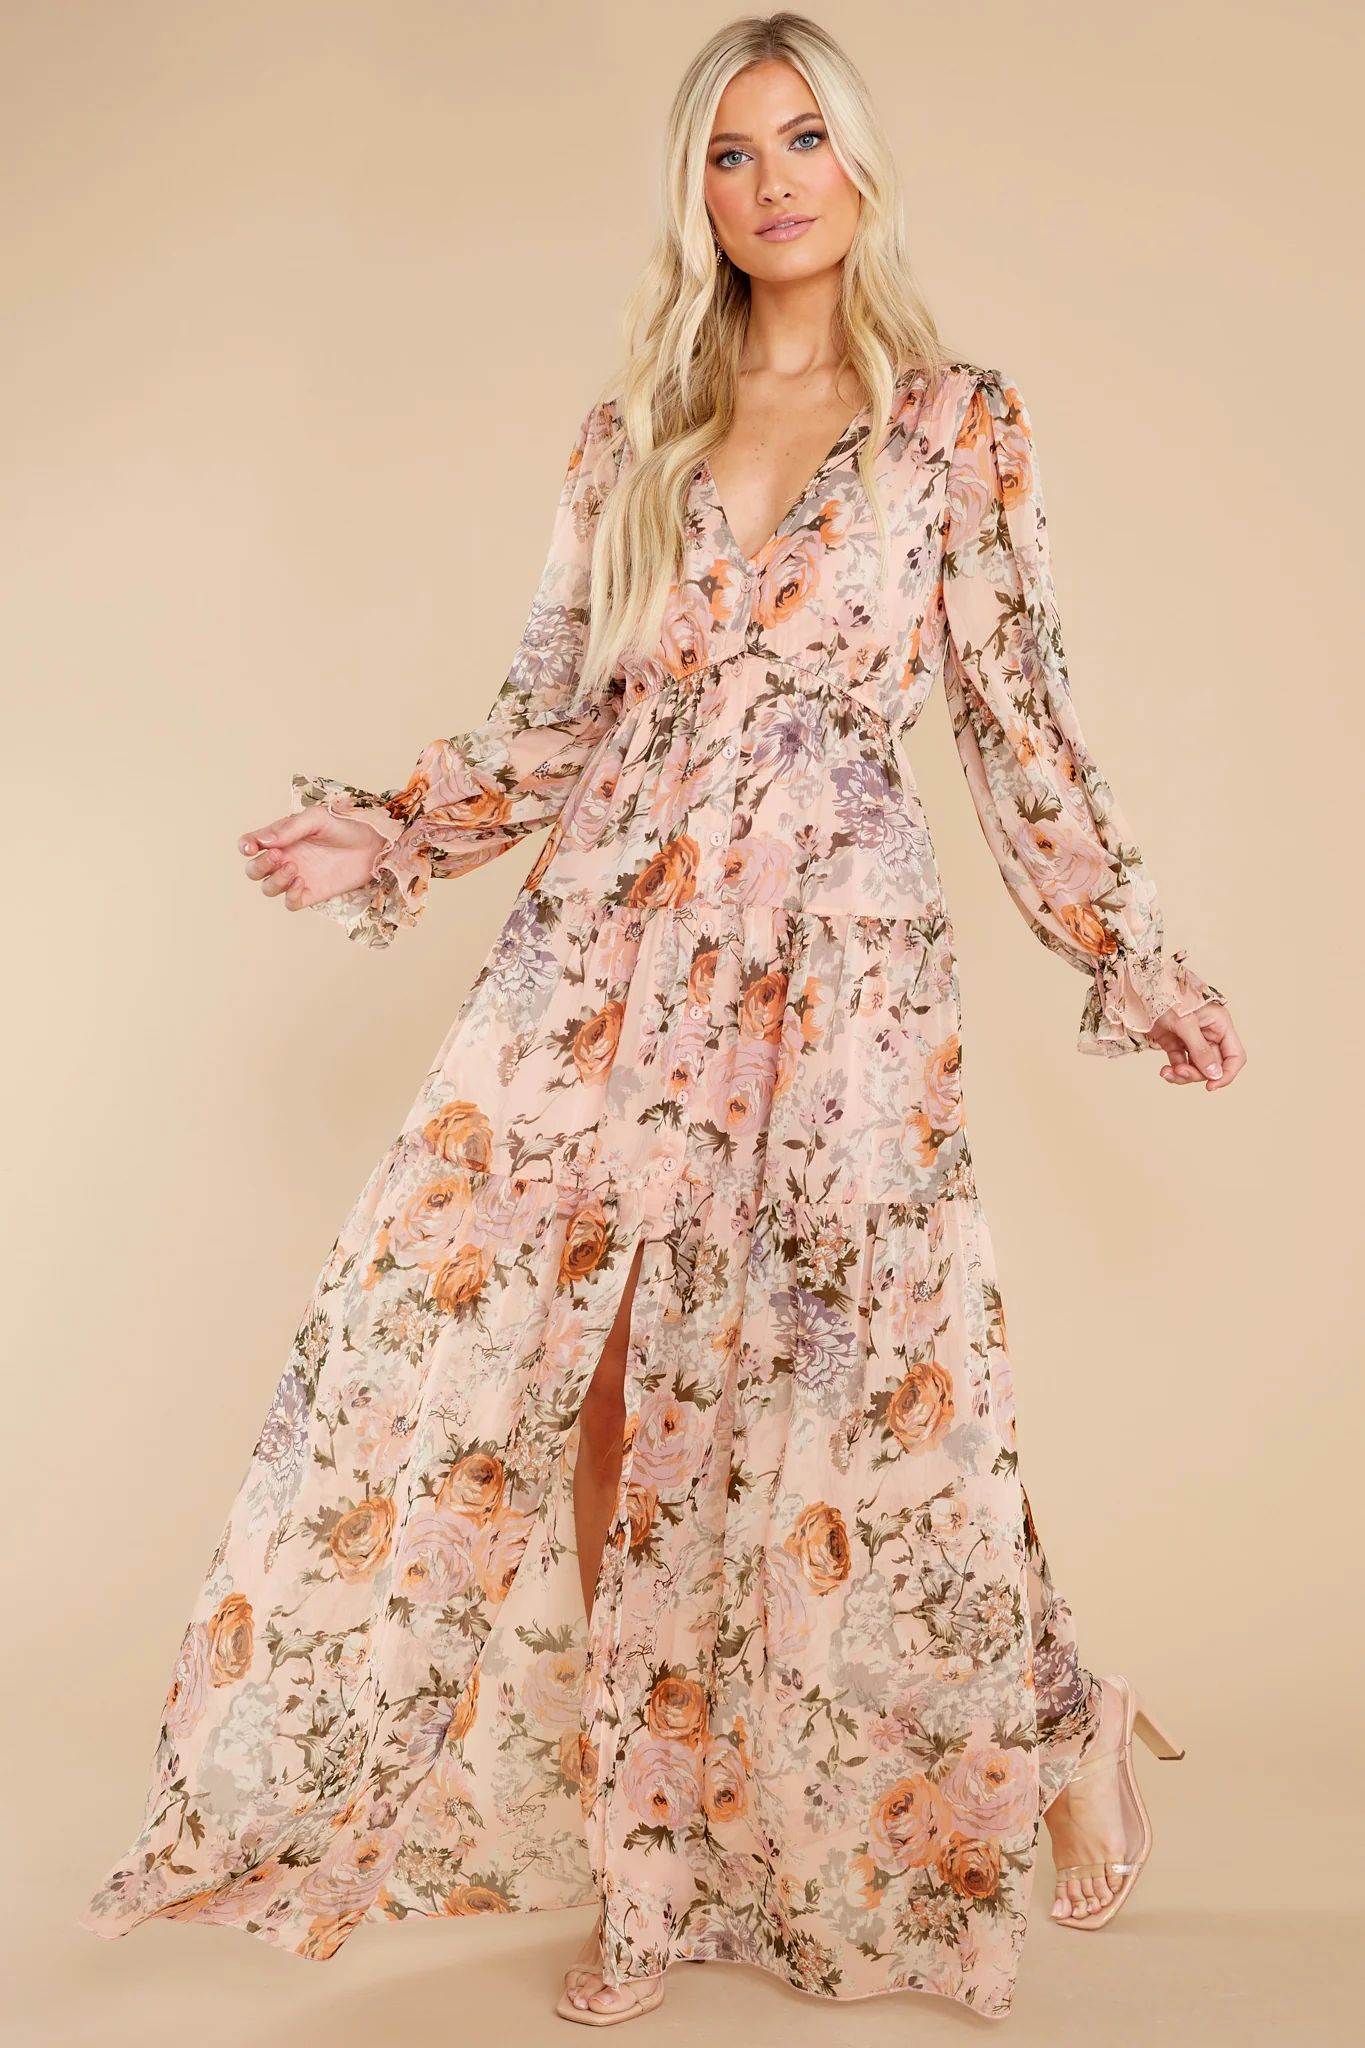 Showing Off Peach Floral Print Maxi Dress | Red Dress 